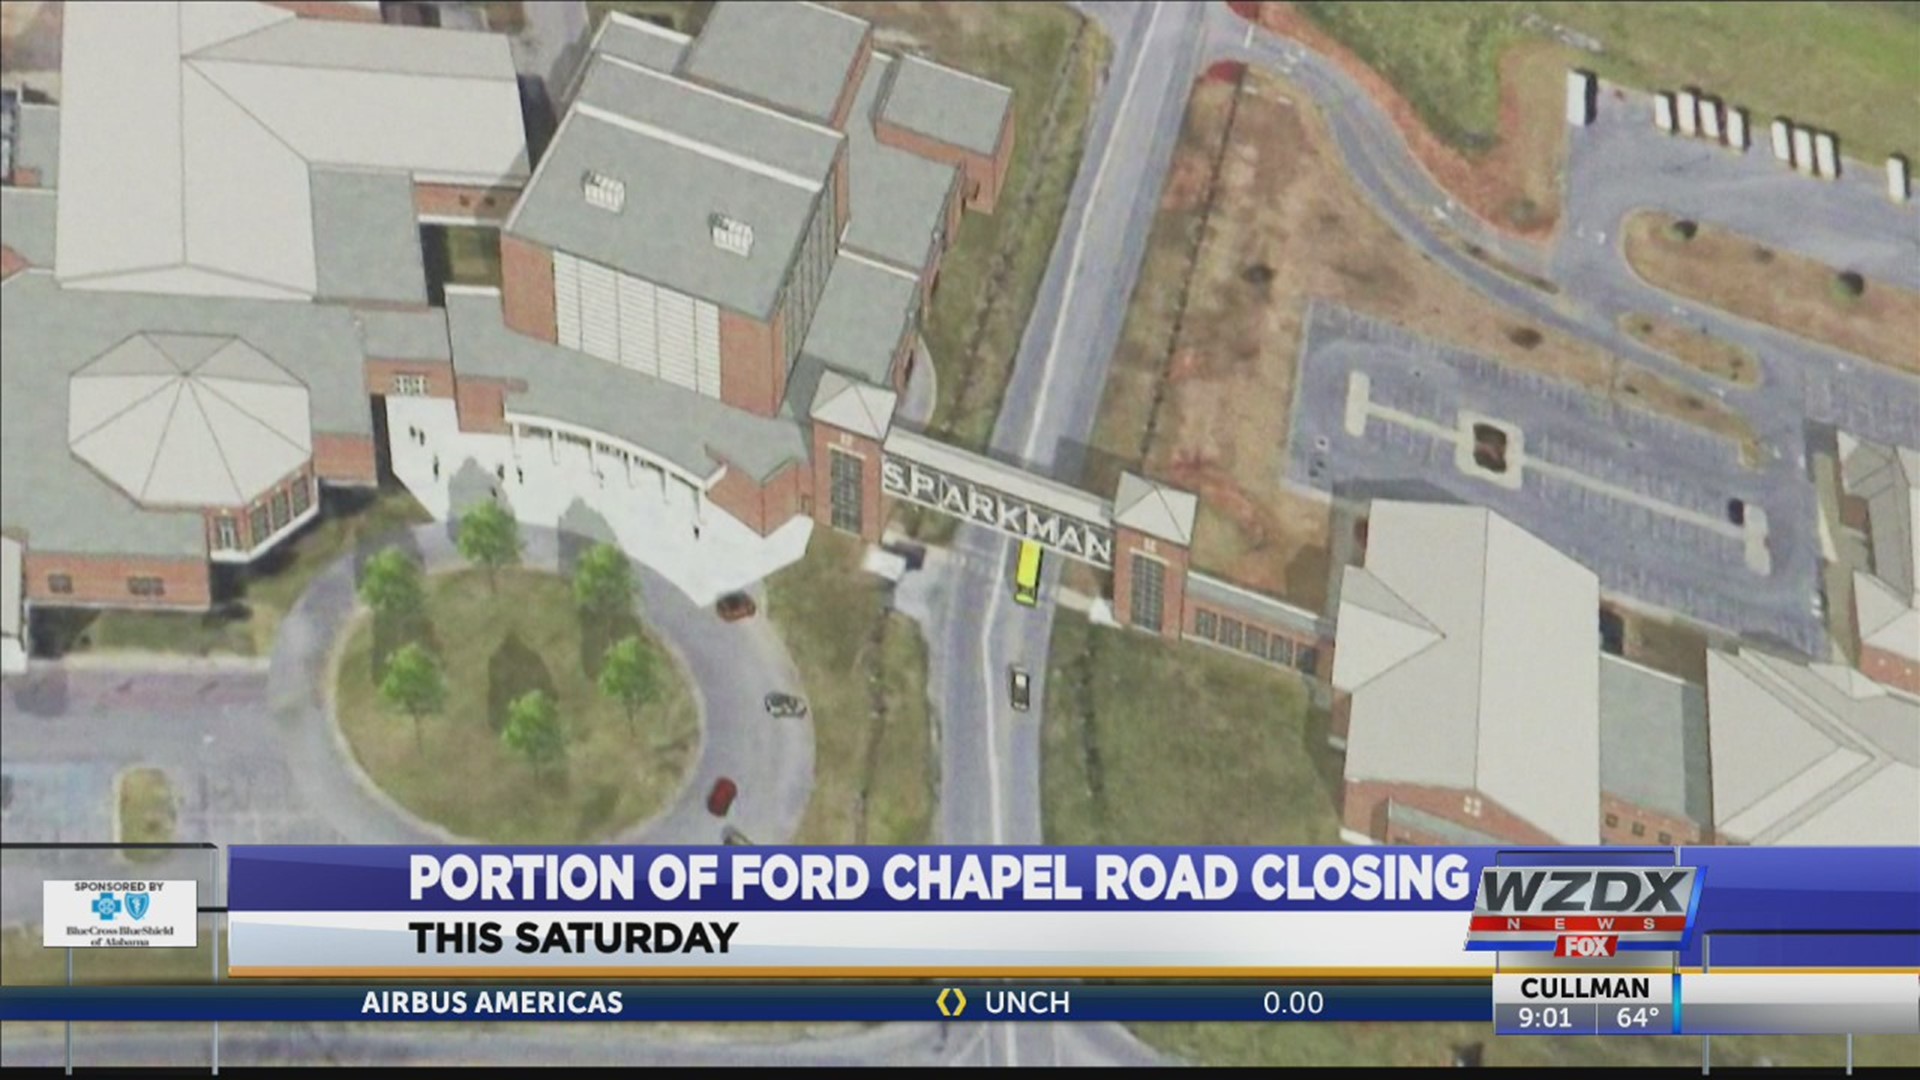 The sky bridge will allow students to walk from Sparkman 9th Grade Academy to Sparkman High School without having to cross Ford Chapel Road, but this new path for students won't come without construction.